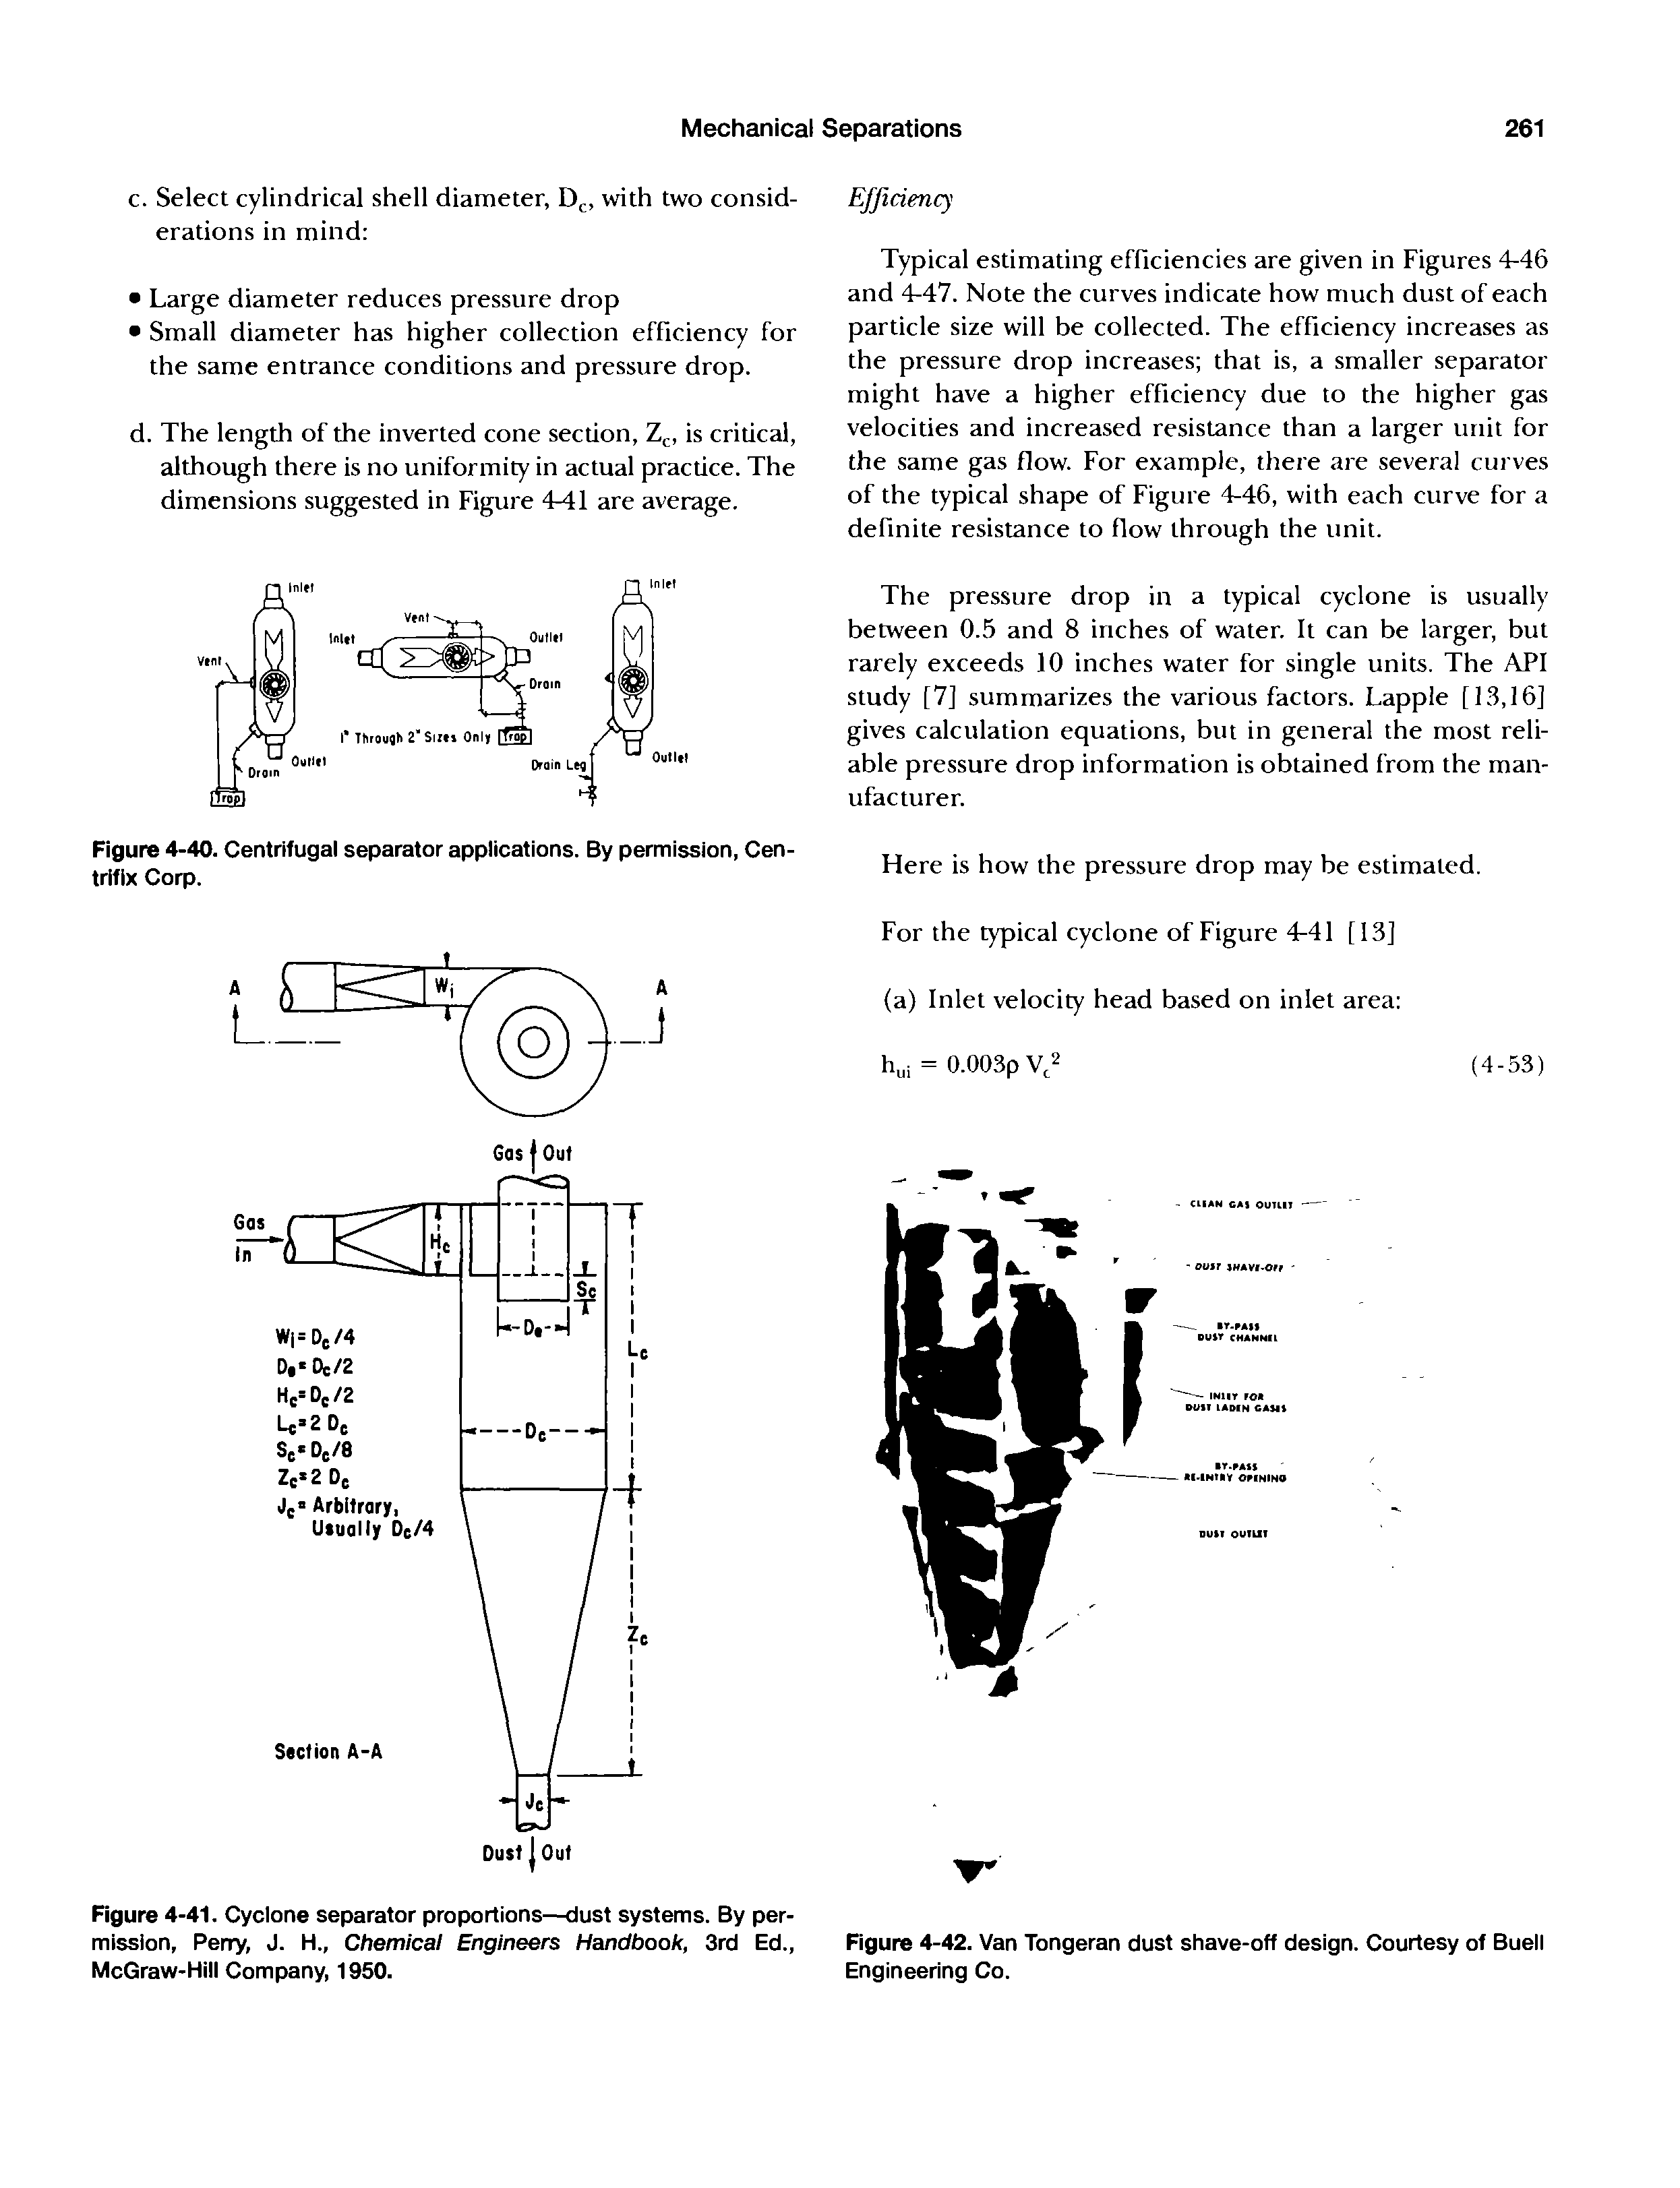 Figure 4-41. Cyclone separator proportions—dust systems. By permission, Perry, J. H., Chemical Engineers Handbook, 3rd Ed., McGraw-Hill Company, 1950.